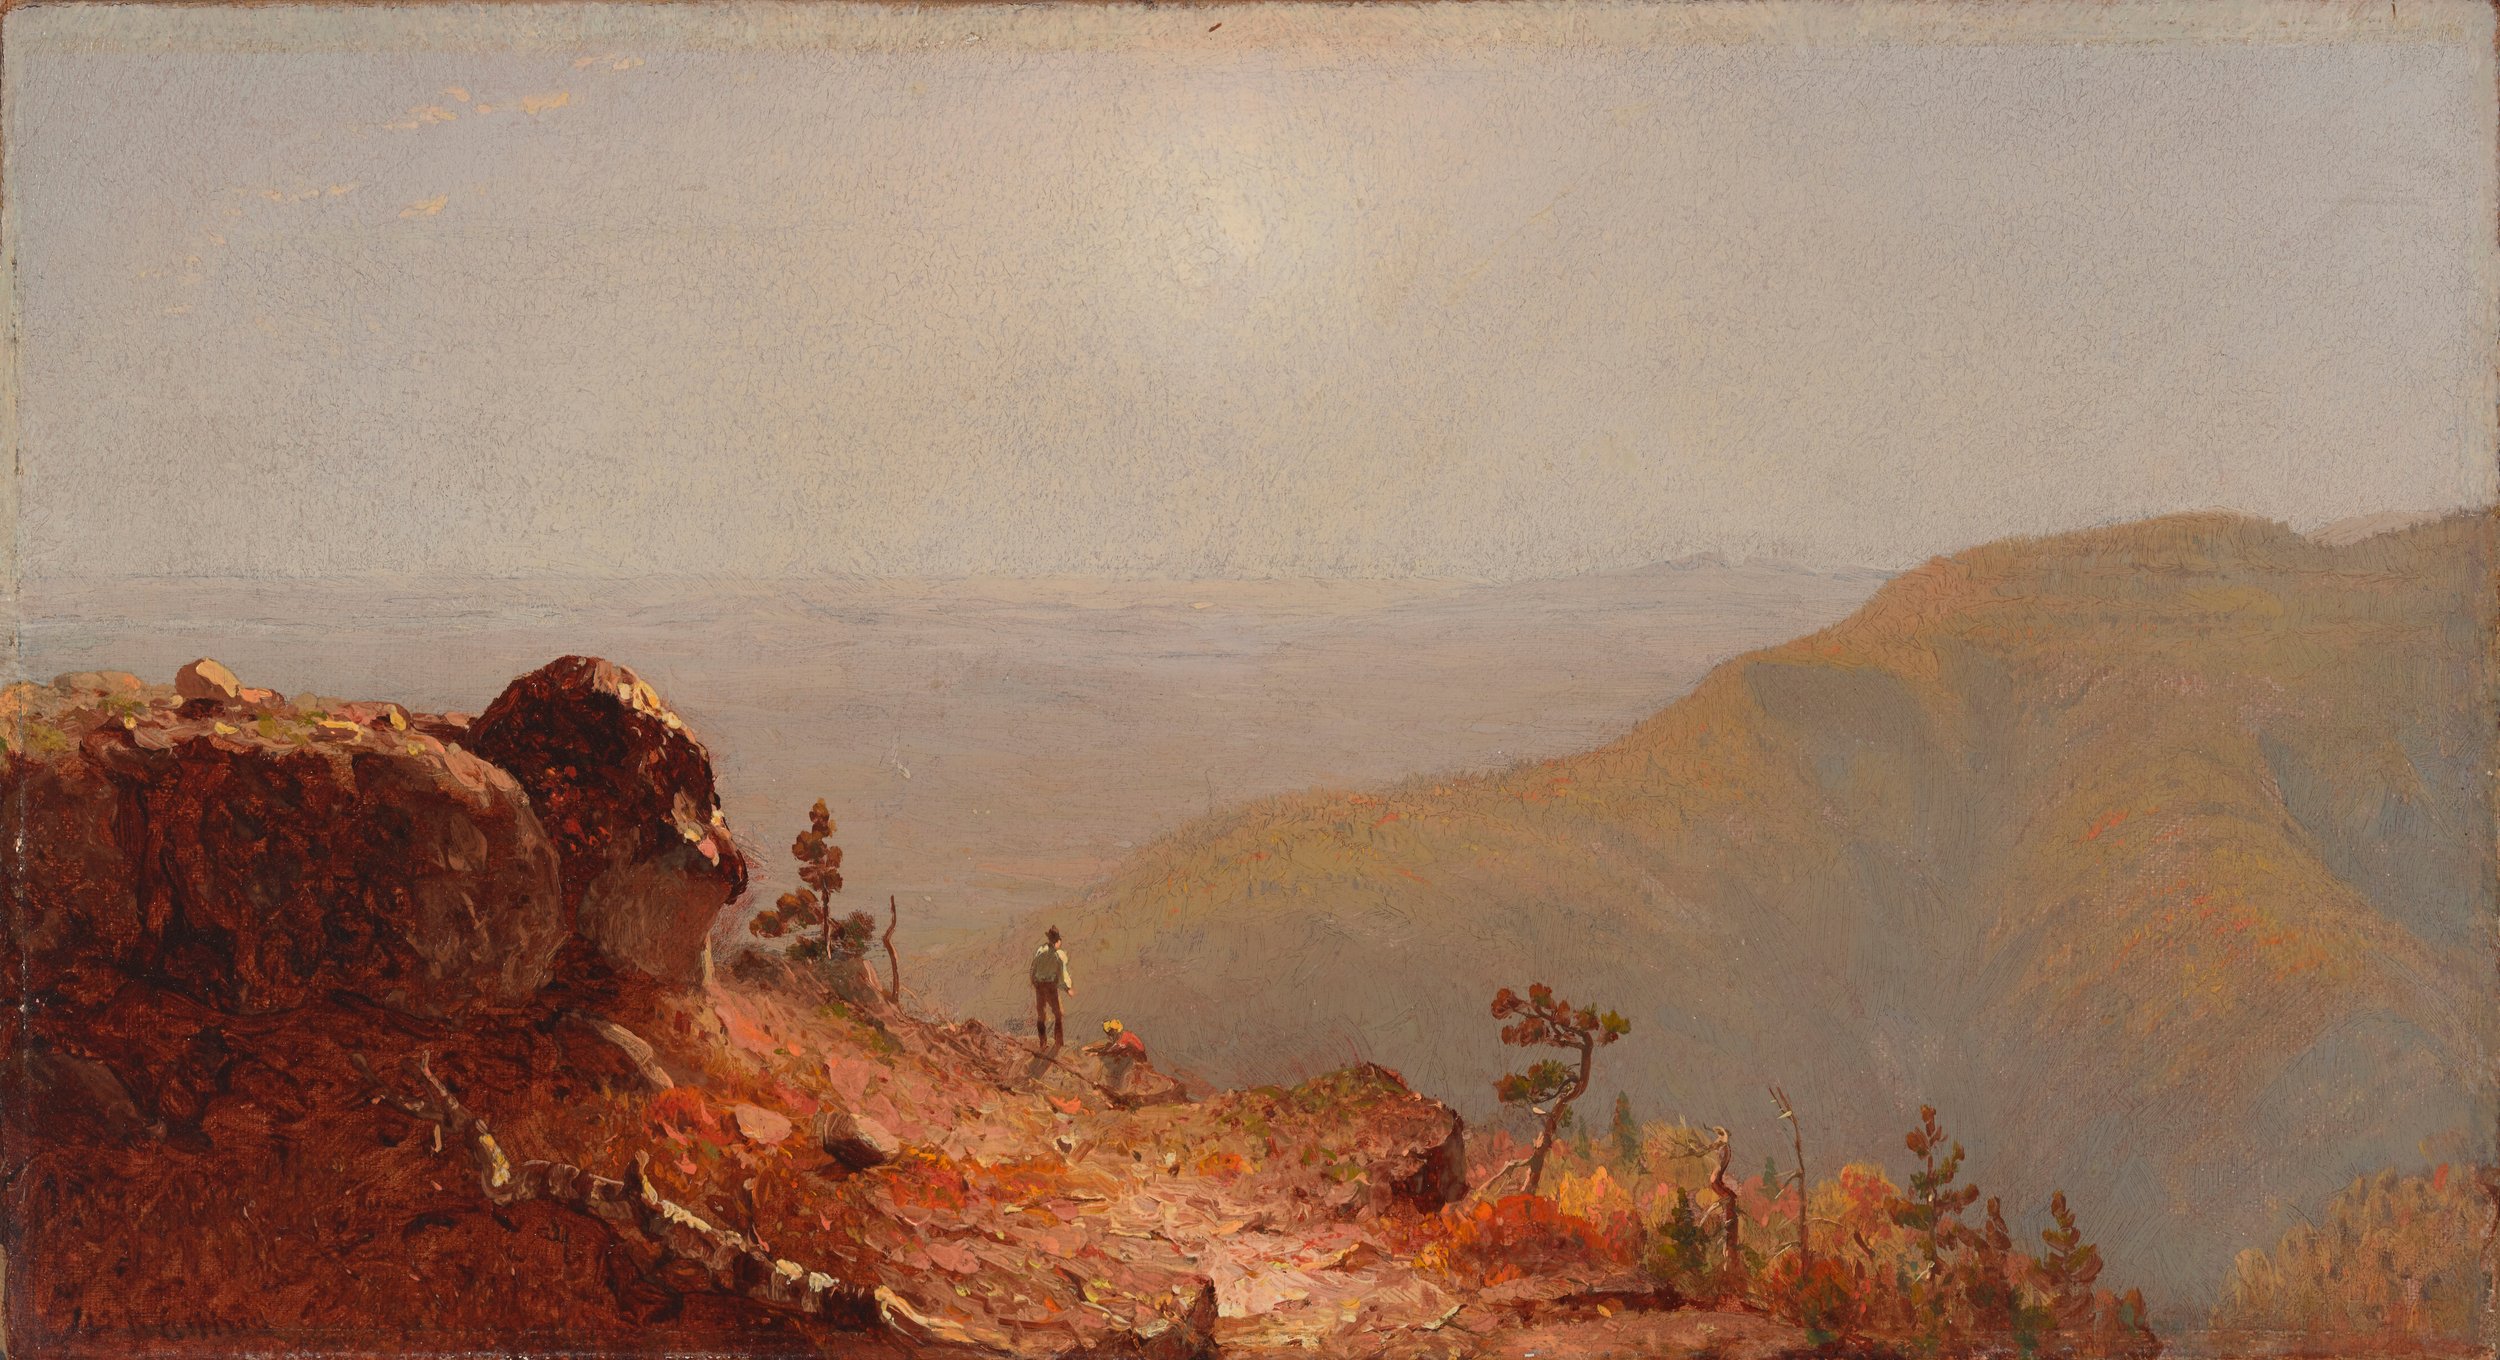   Sanford Robinson Gifford  United States, 1823–1880  Study for the View from South Mountain in the Catskills , 1873  oil on canvas, 8 1/2 x 15 1/2 inches Gift of Walter B. and Marcia F. Goldfarb, 2016.22 